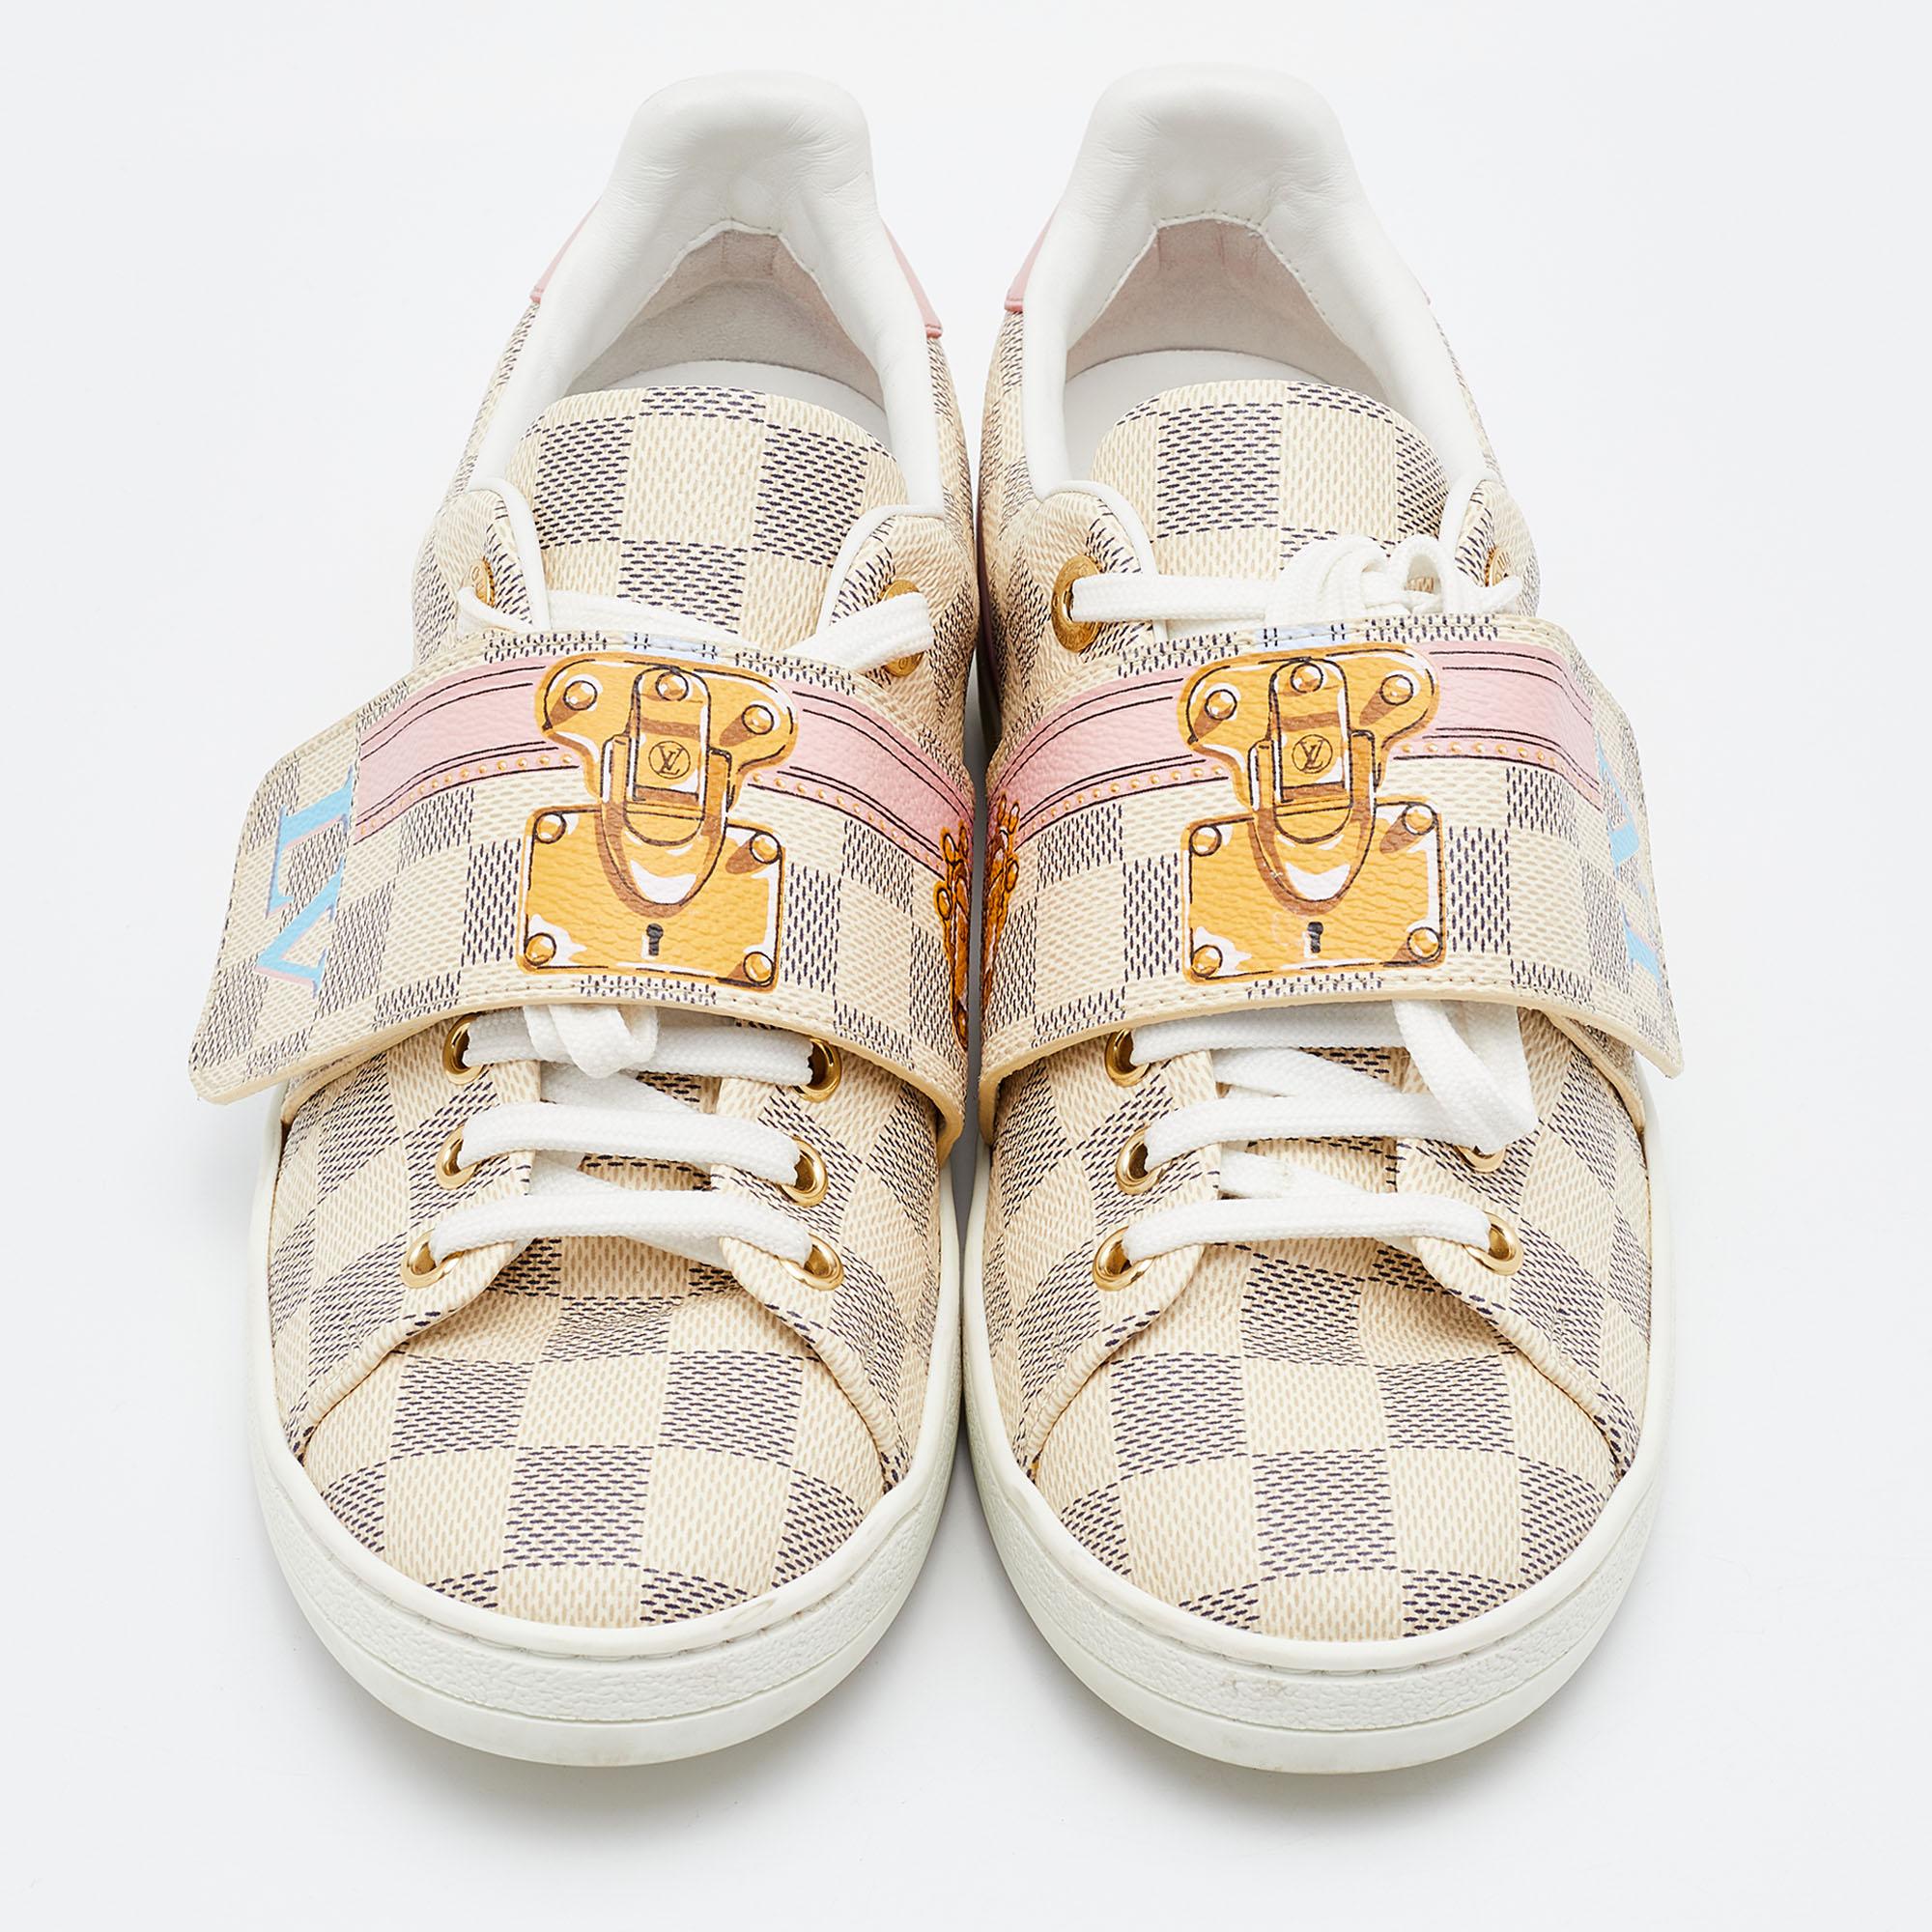 You'll love wearing these Summer Trunks sneakers from Louis Vuitton! The sneakers are crafted from Damier Azur canvas and feature round toes and a velcro strap over the lace-up vamps. They are finished with comfortable leather-lined